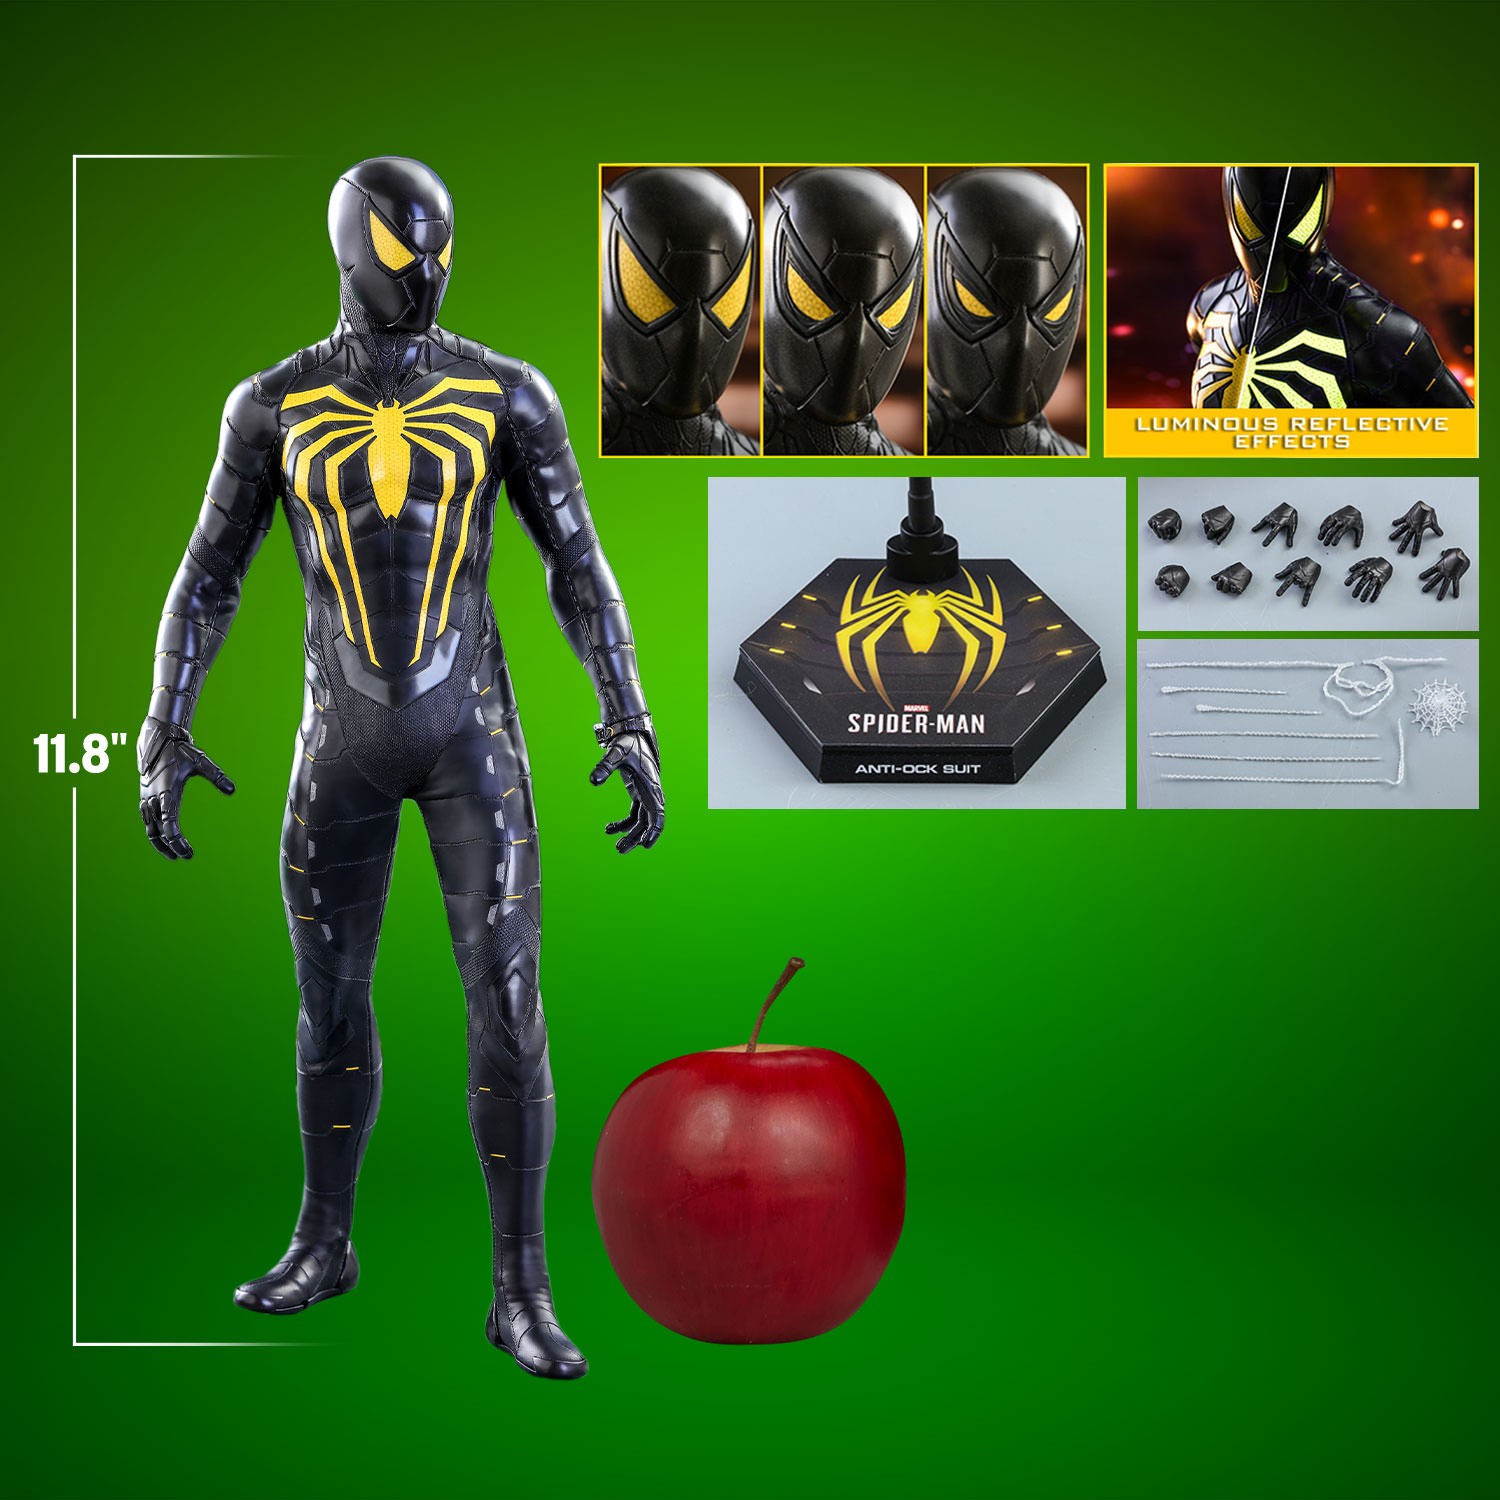 Spider-Man (Anti-Ock Suit) Collector Edition (Prototype Shown) View 2